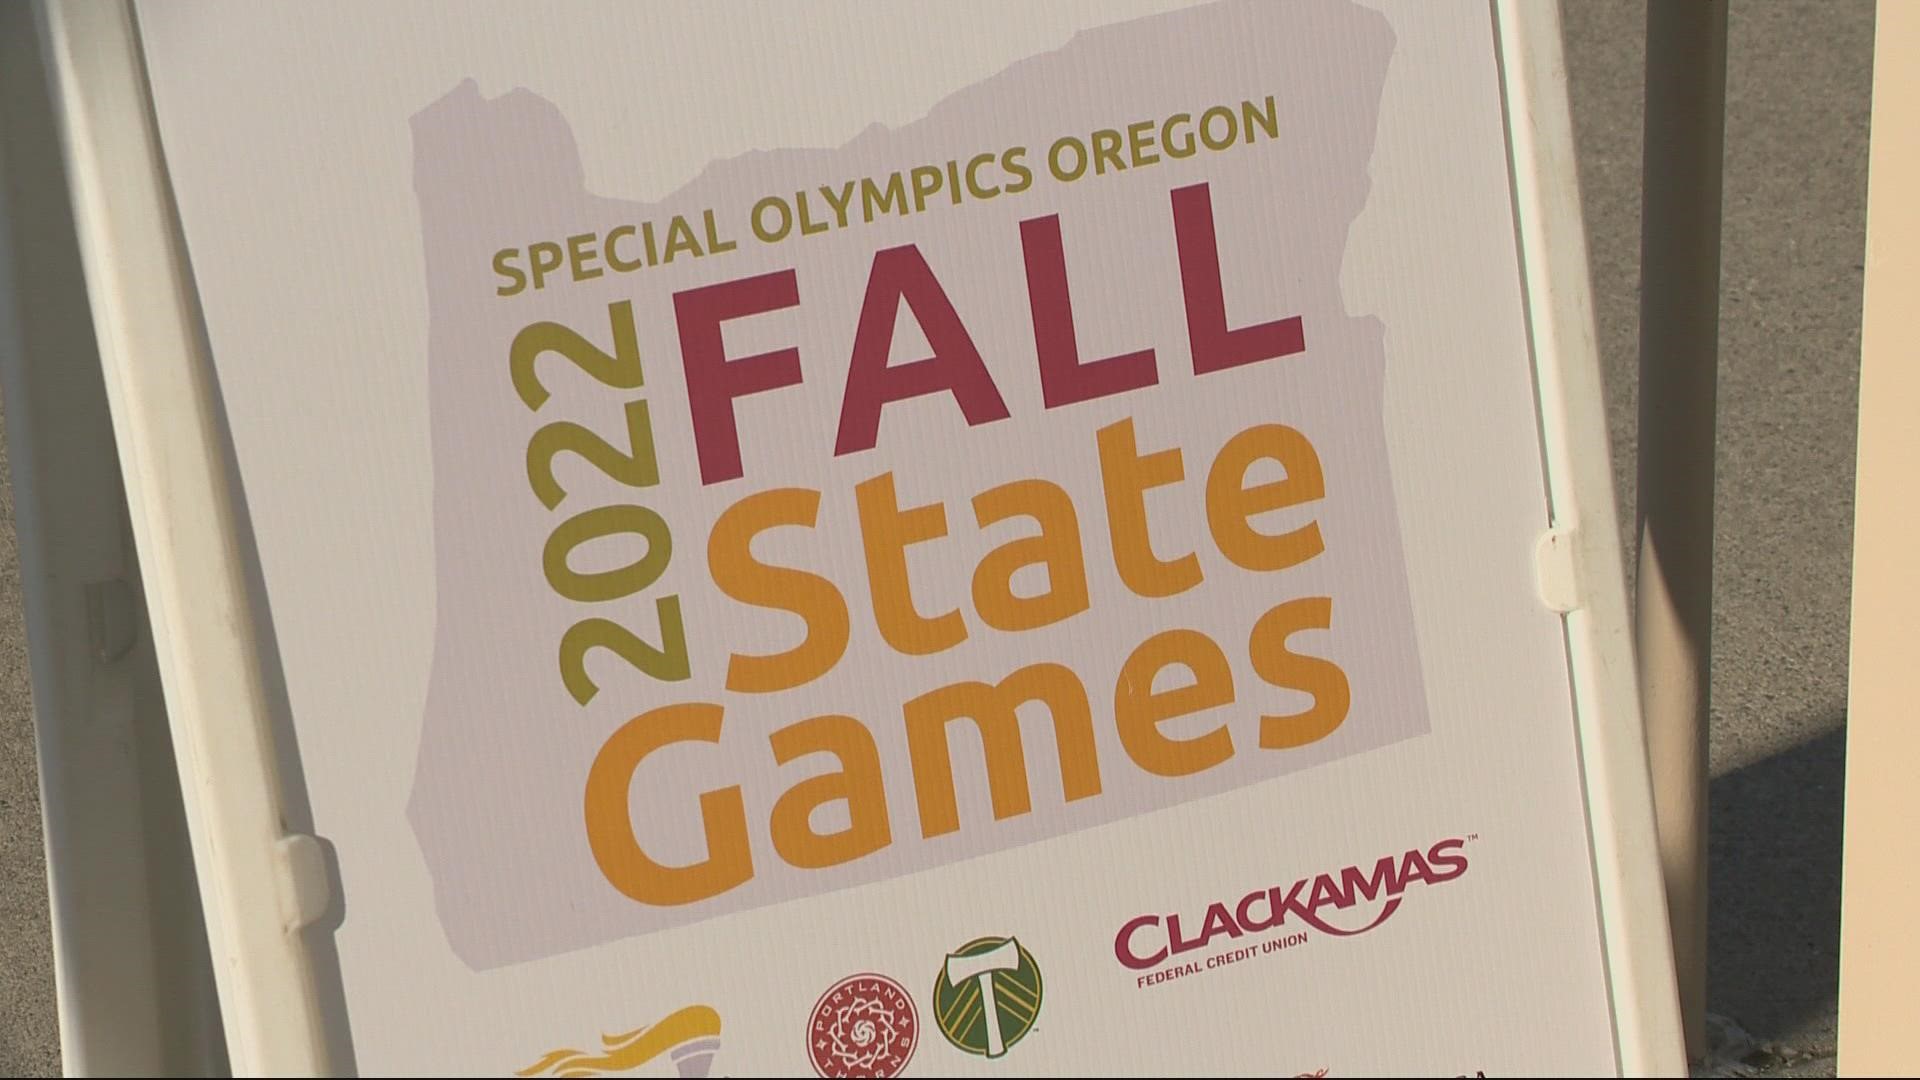 Hundreds of athletes take part in volleyball and soccer competitions in the Special Olympics.